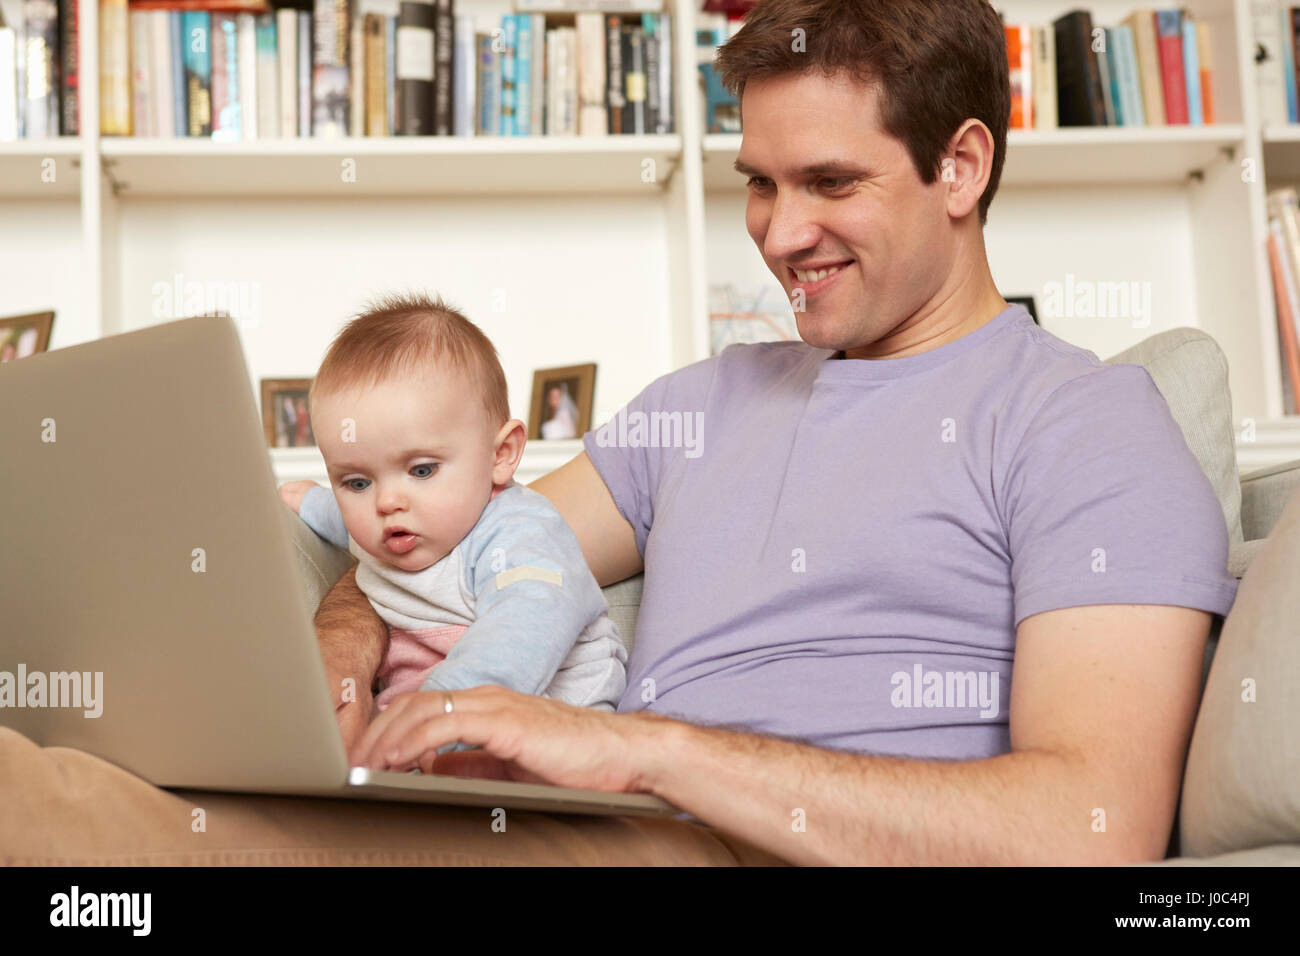 Baby girl helping father with laptop typing on sofa Stock Photo